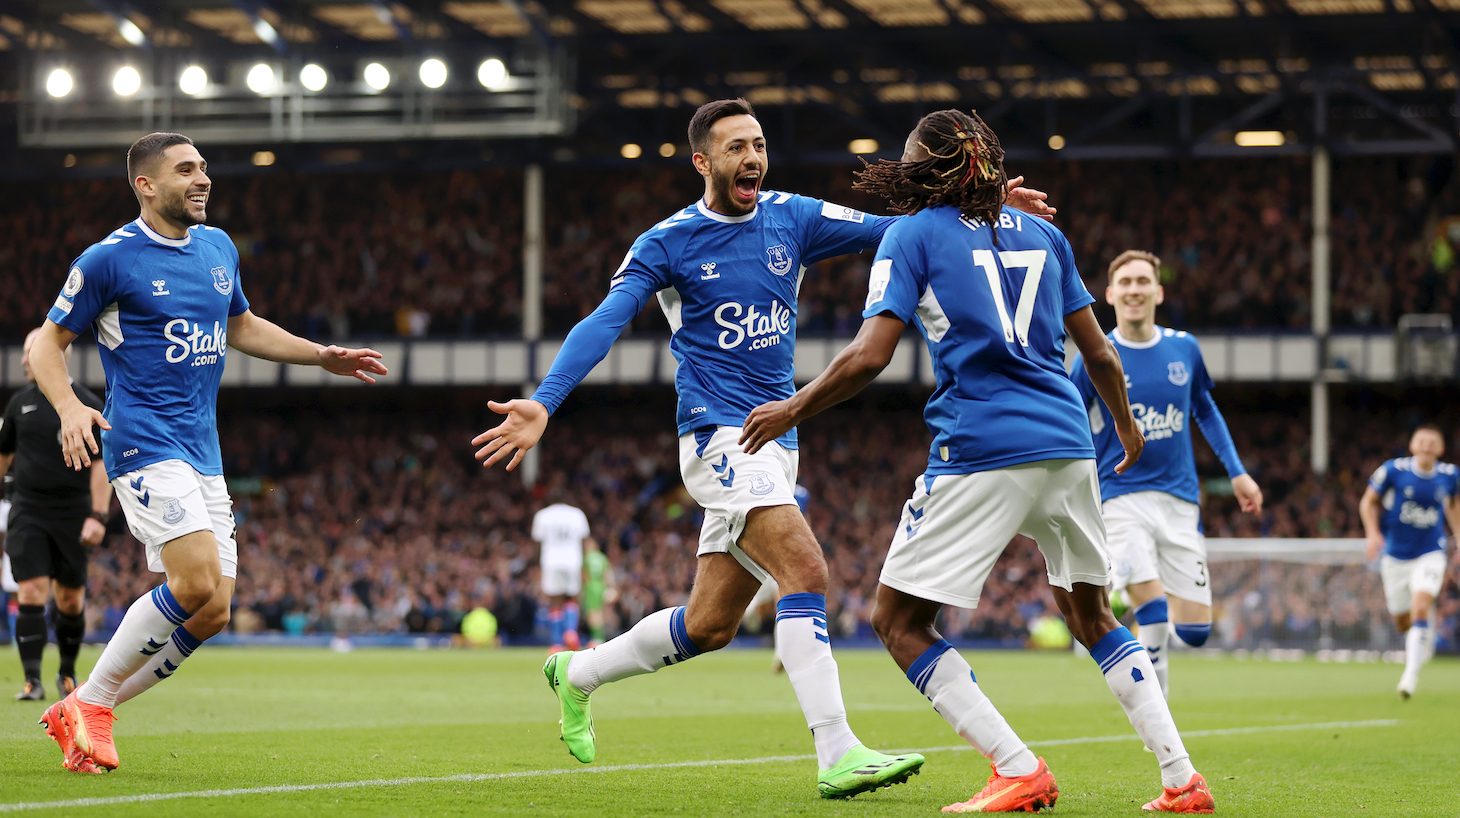 Dwight McNeil of Everton celebrates with teammate Alex Iwobi after scoring their team's third goal during the Premier League match between Everton FC and Crystal Palace at Goodison Park on October 22, 2022 in Liverpool, England.